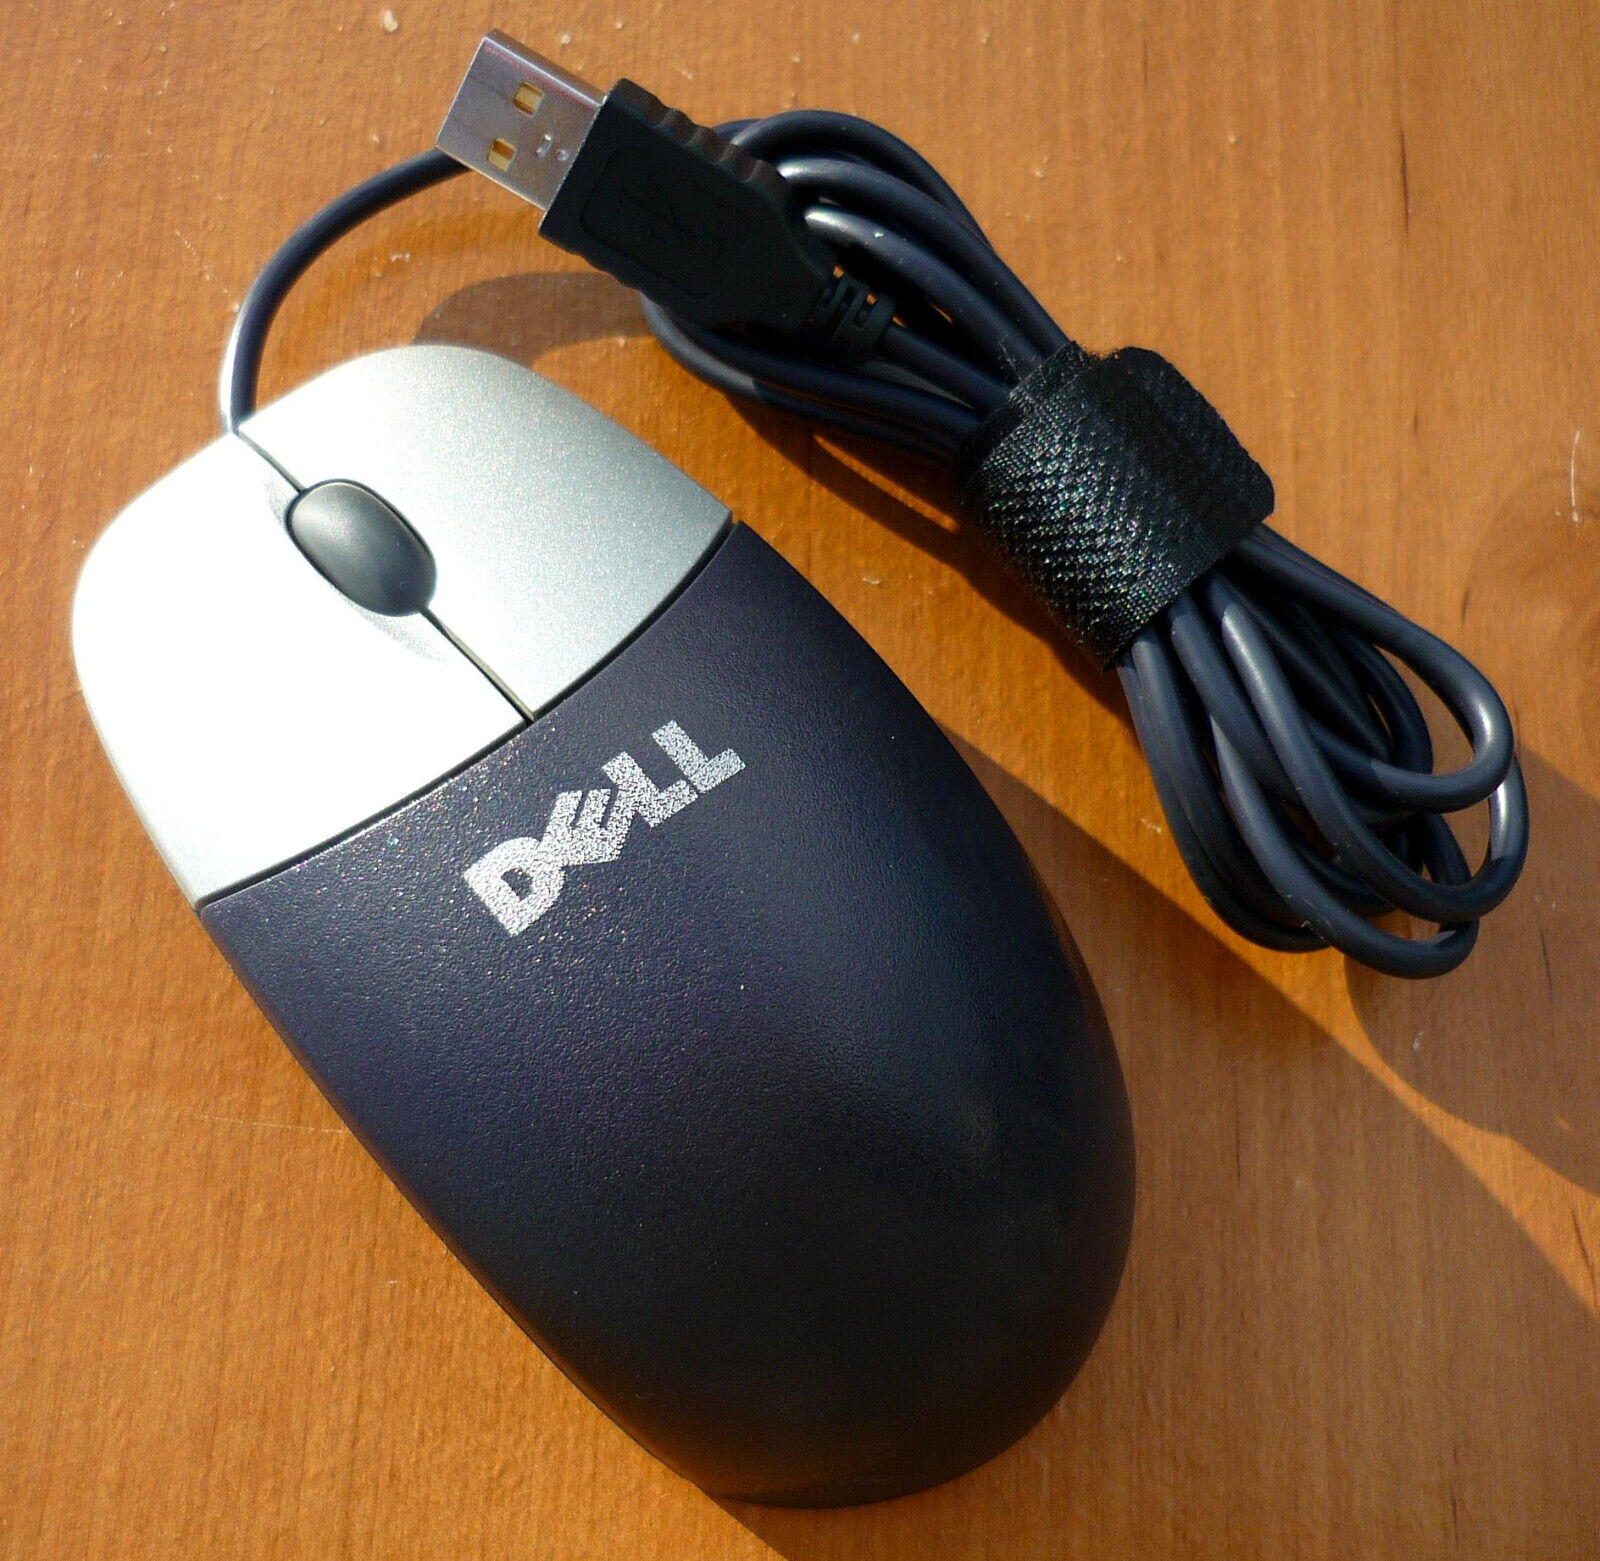 Vintage Dell USB Optical Wheel Mouse M-UVDEL1 DARK GRAY Clean Tested - Good Cond